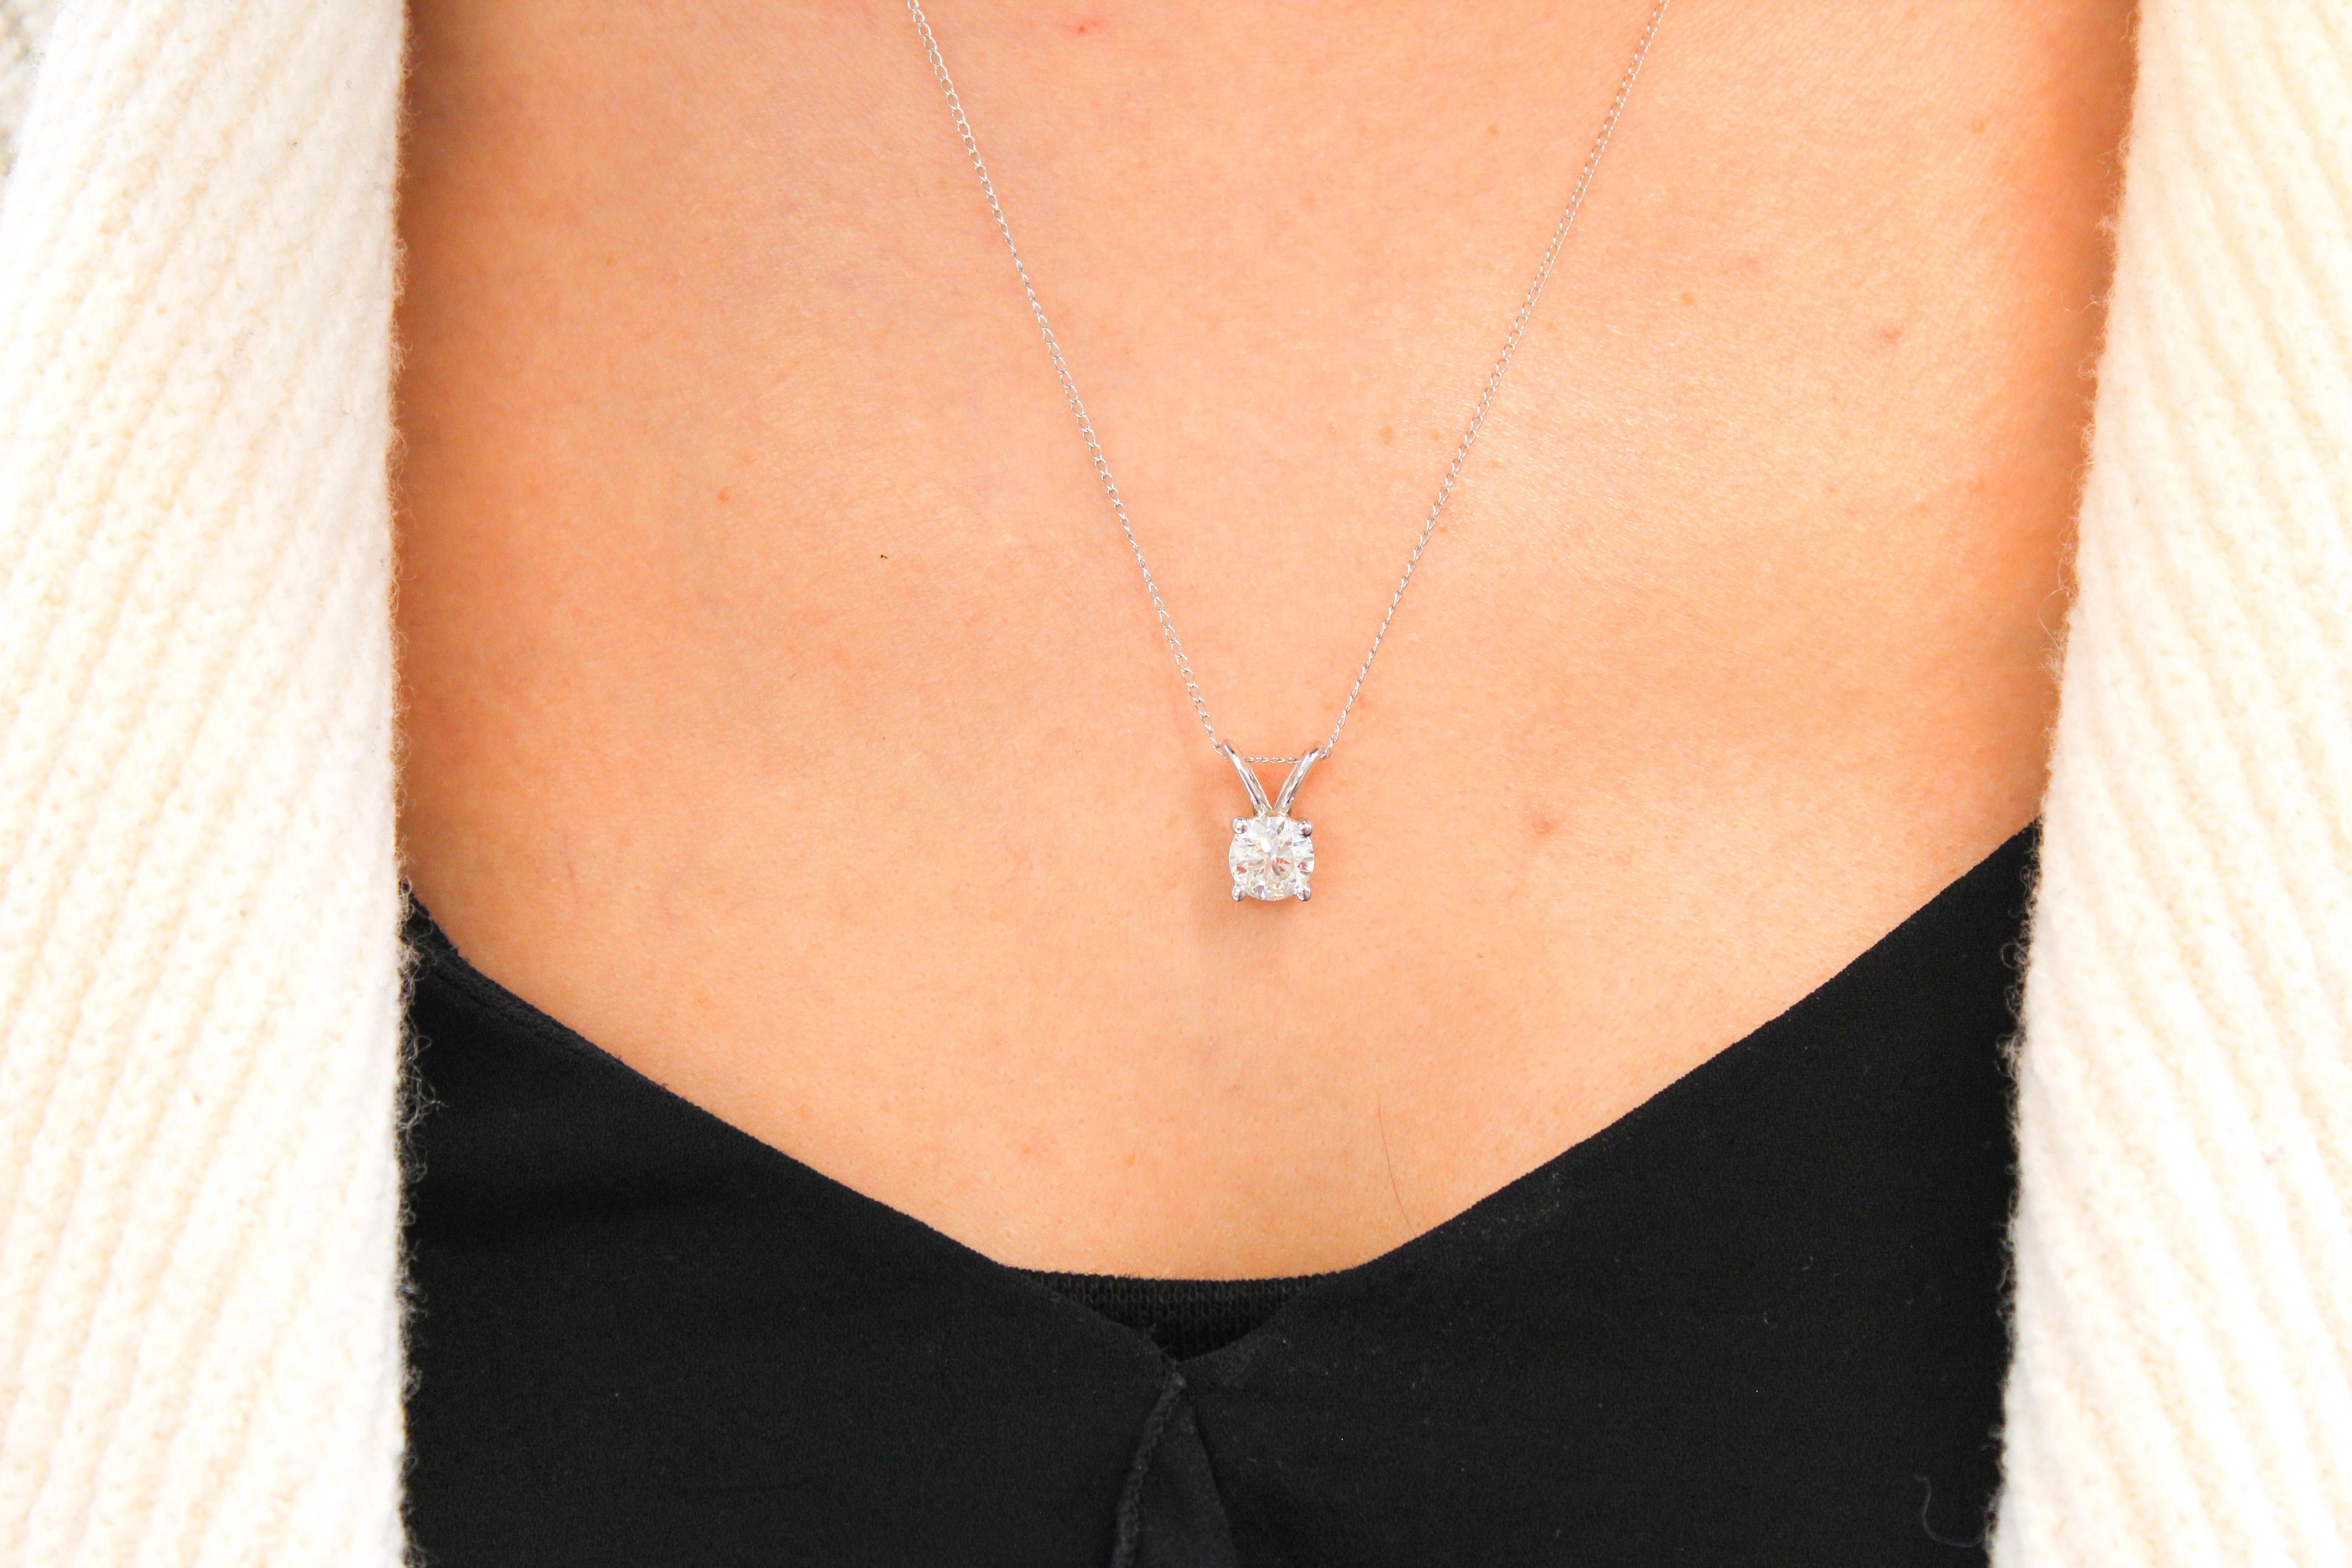 This impressive diamond solitaire pendant is finely crafted in brightly polished 14 karat rose gold and features a round shaped 2.00 carat diamond that has SI clarity, gracefully prong set on a shiny split bail. Ideal as an anniversary or birthday